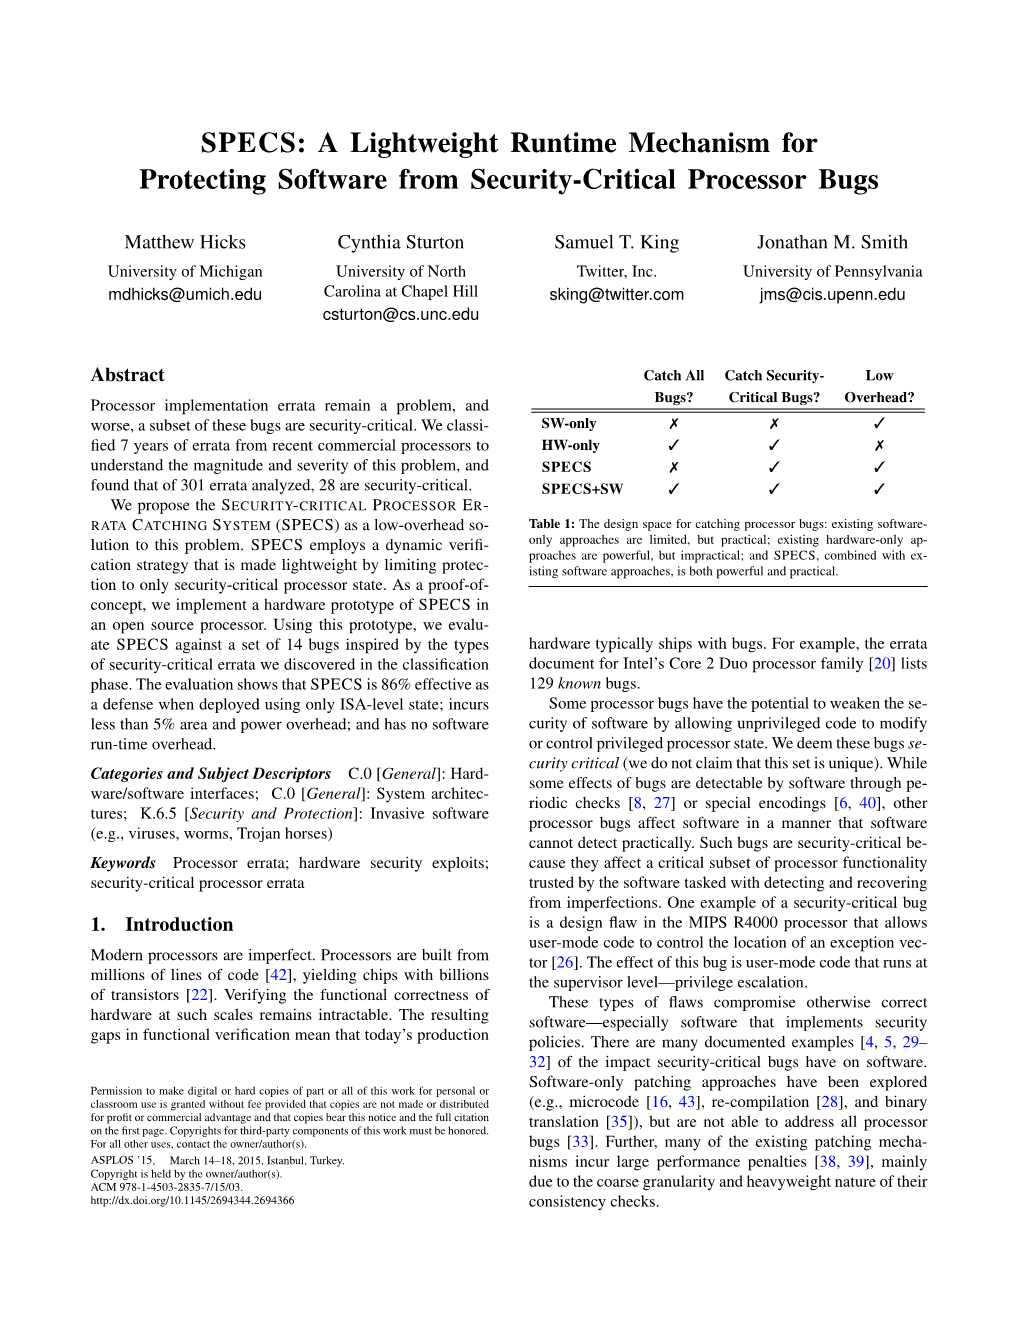 SPECS: a Lightweight Runtime Mechanism for Protecting Software from Security-Critical Processor Bugs